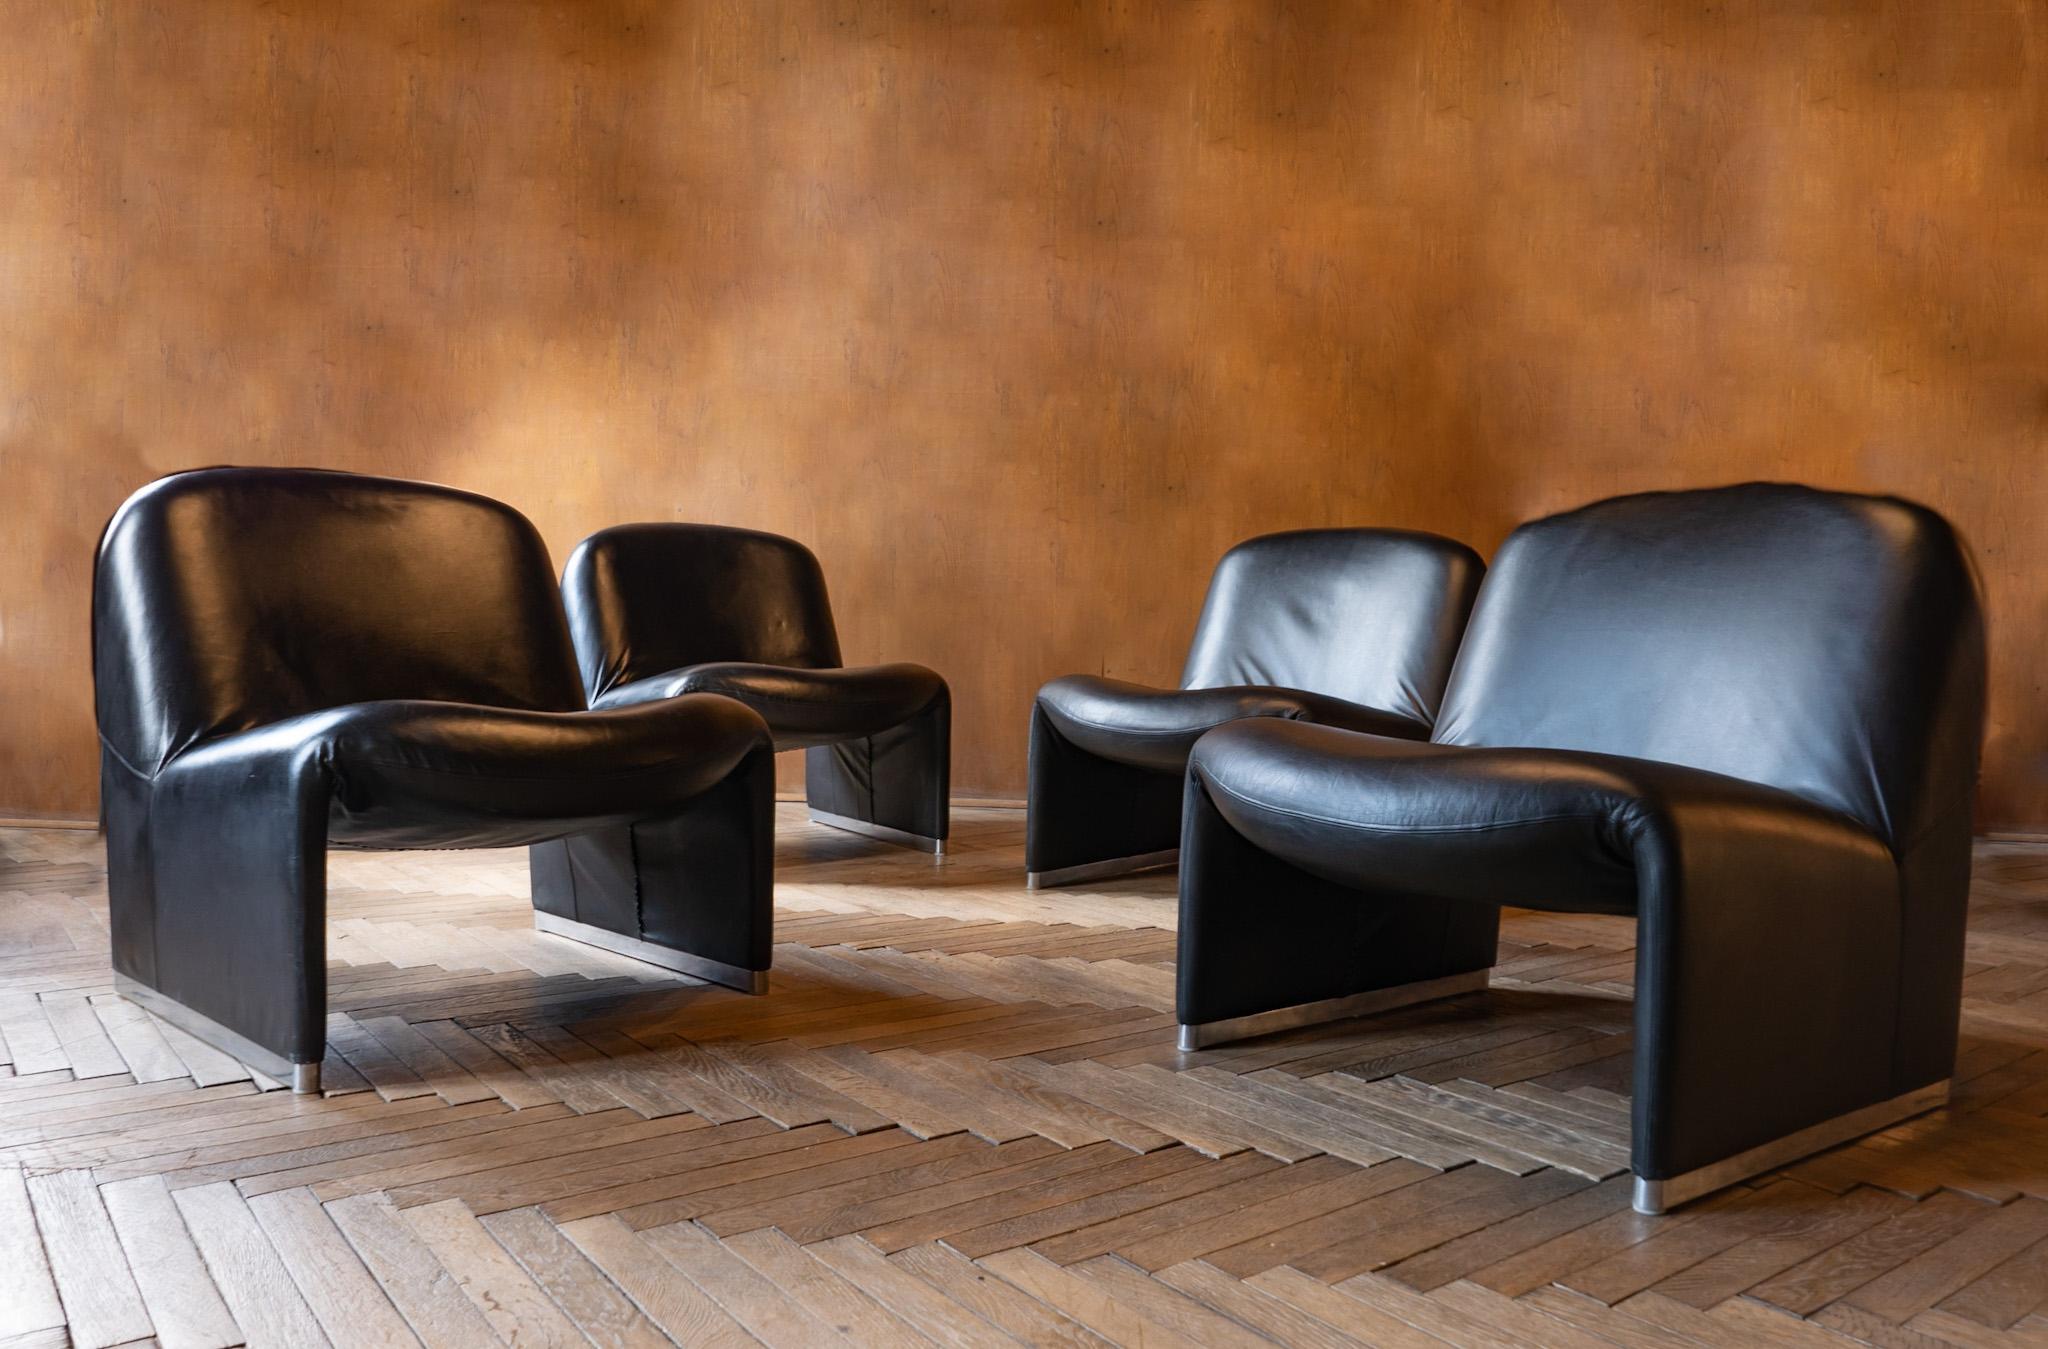 Italian Mid-Century Modern Black Leather Alky Chairs by Giancarlo Piretti, Italy, 1970s